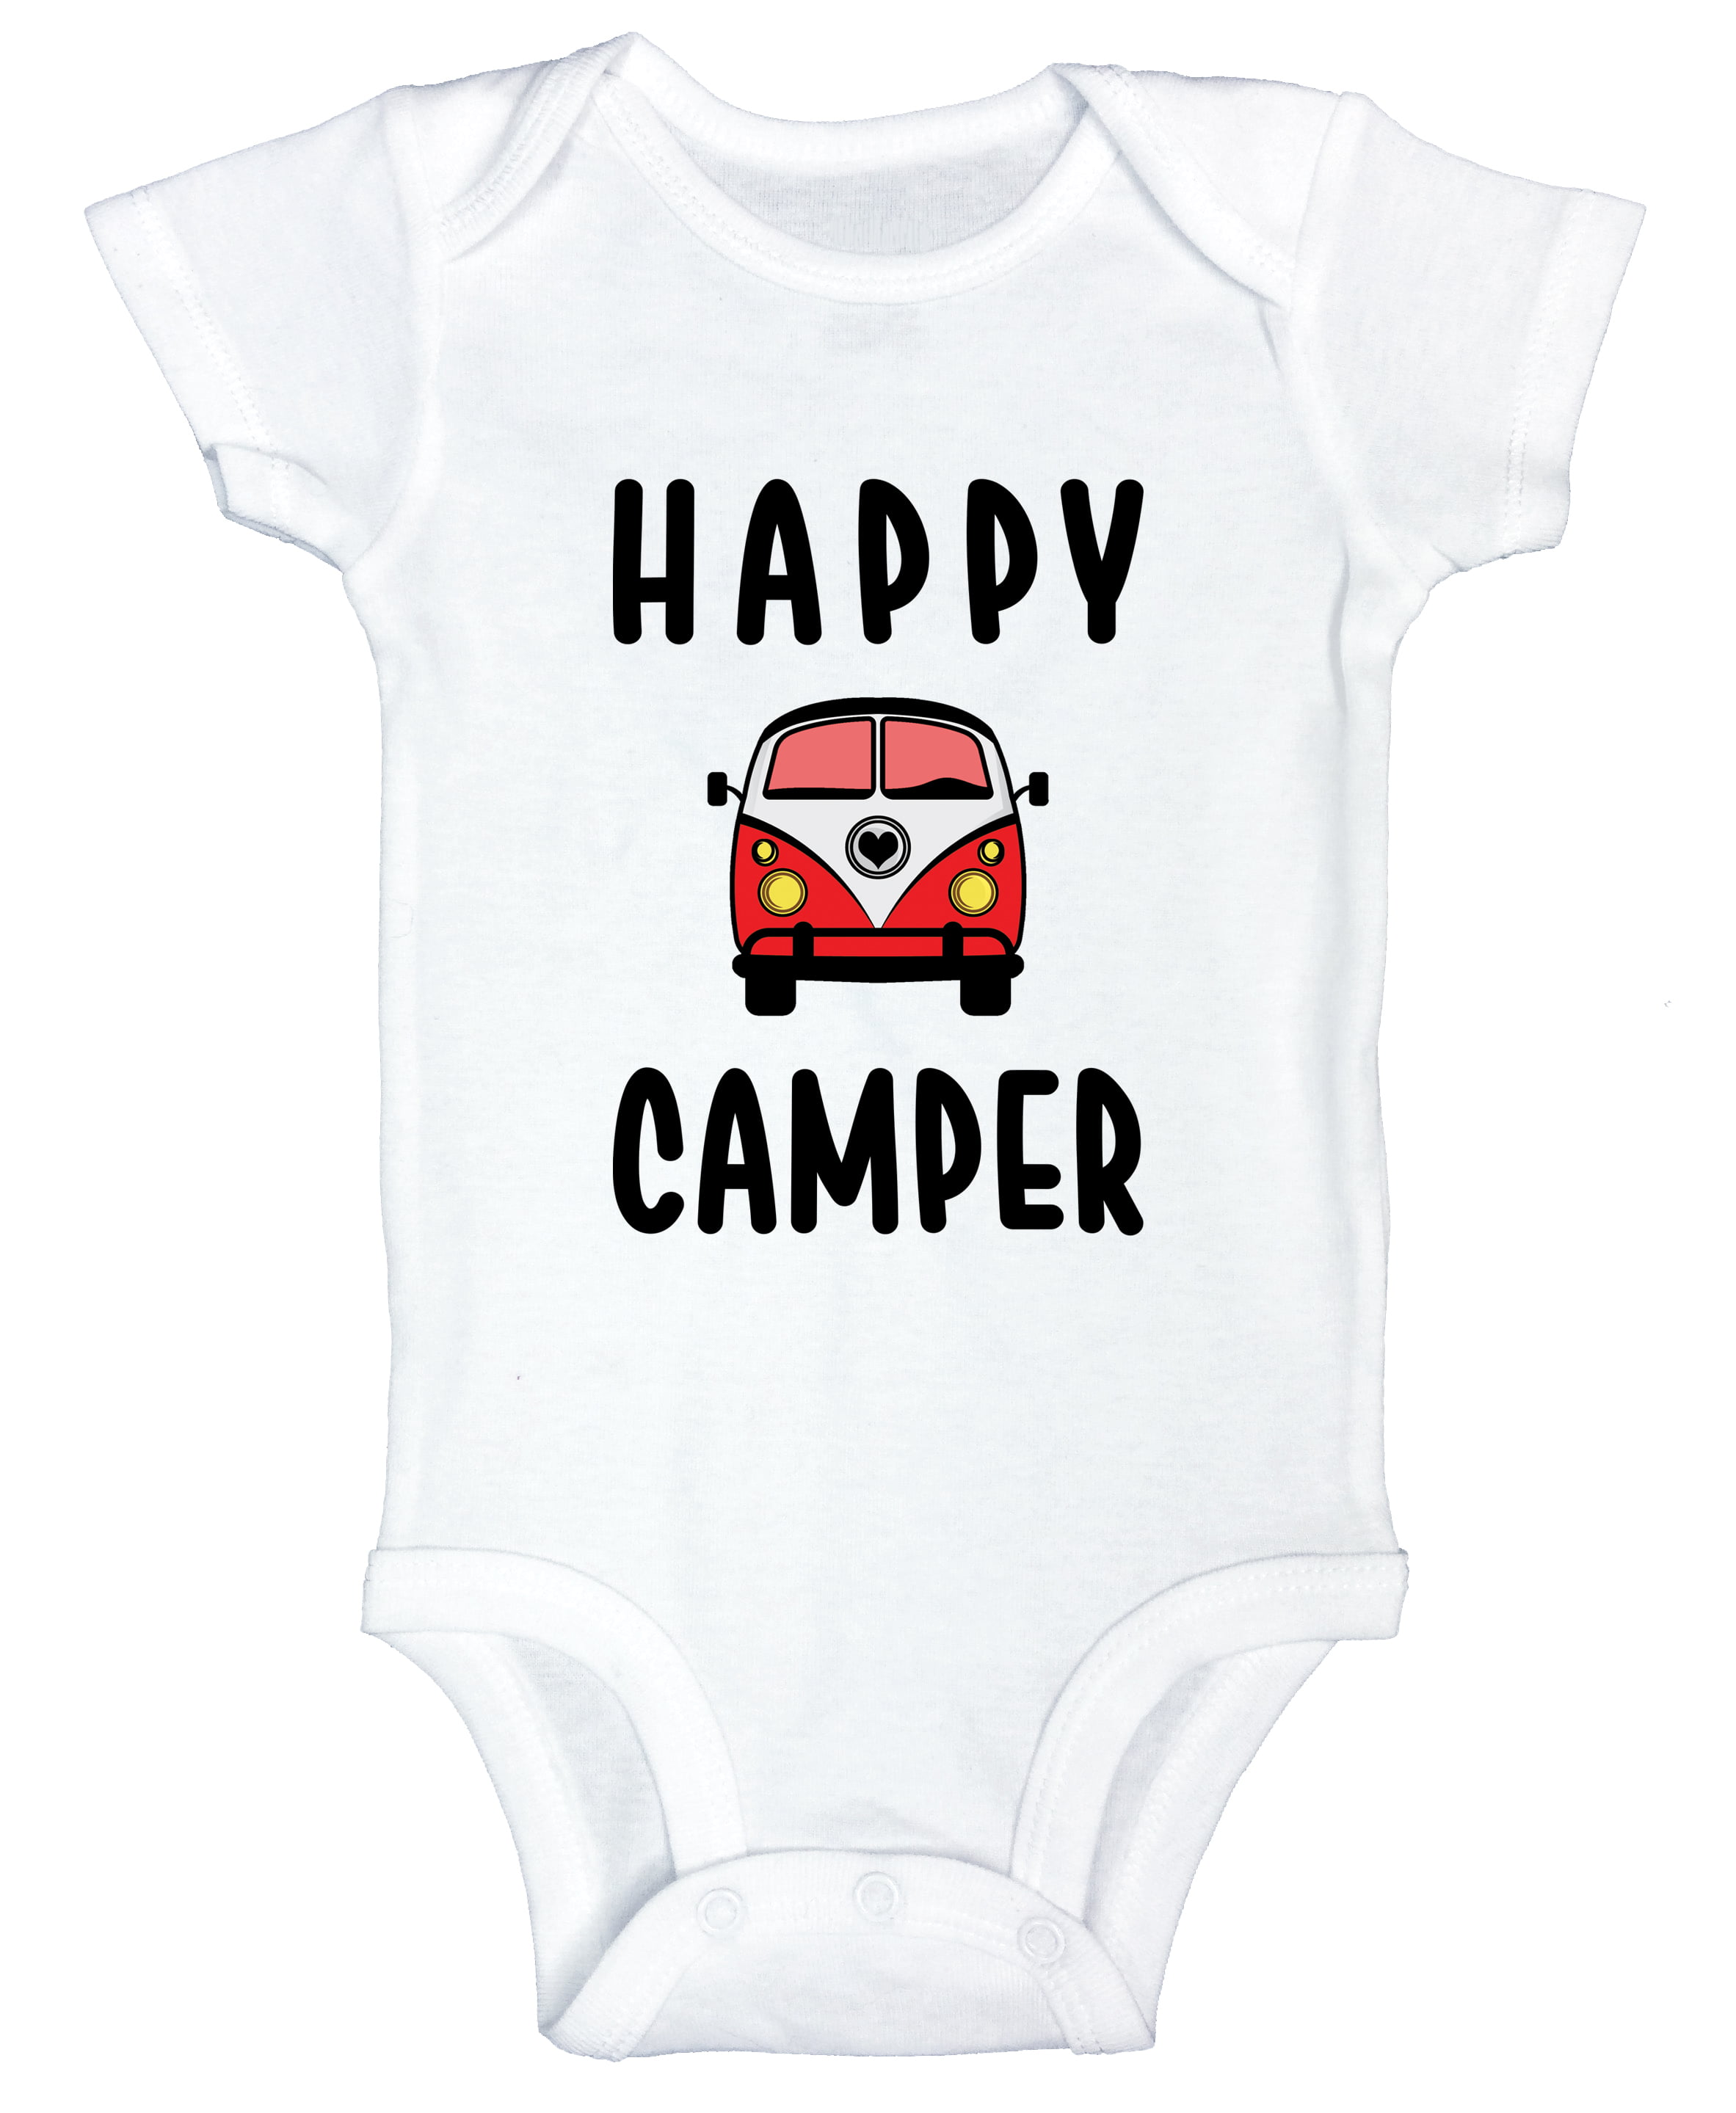 Happy Camper baby all sizes cute bodysuit funny onepiece camping newborn gift 